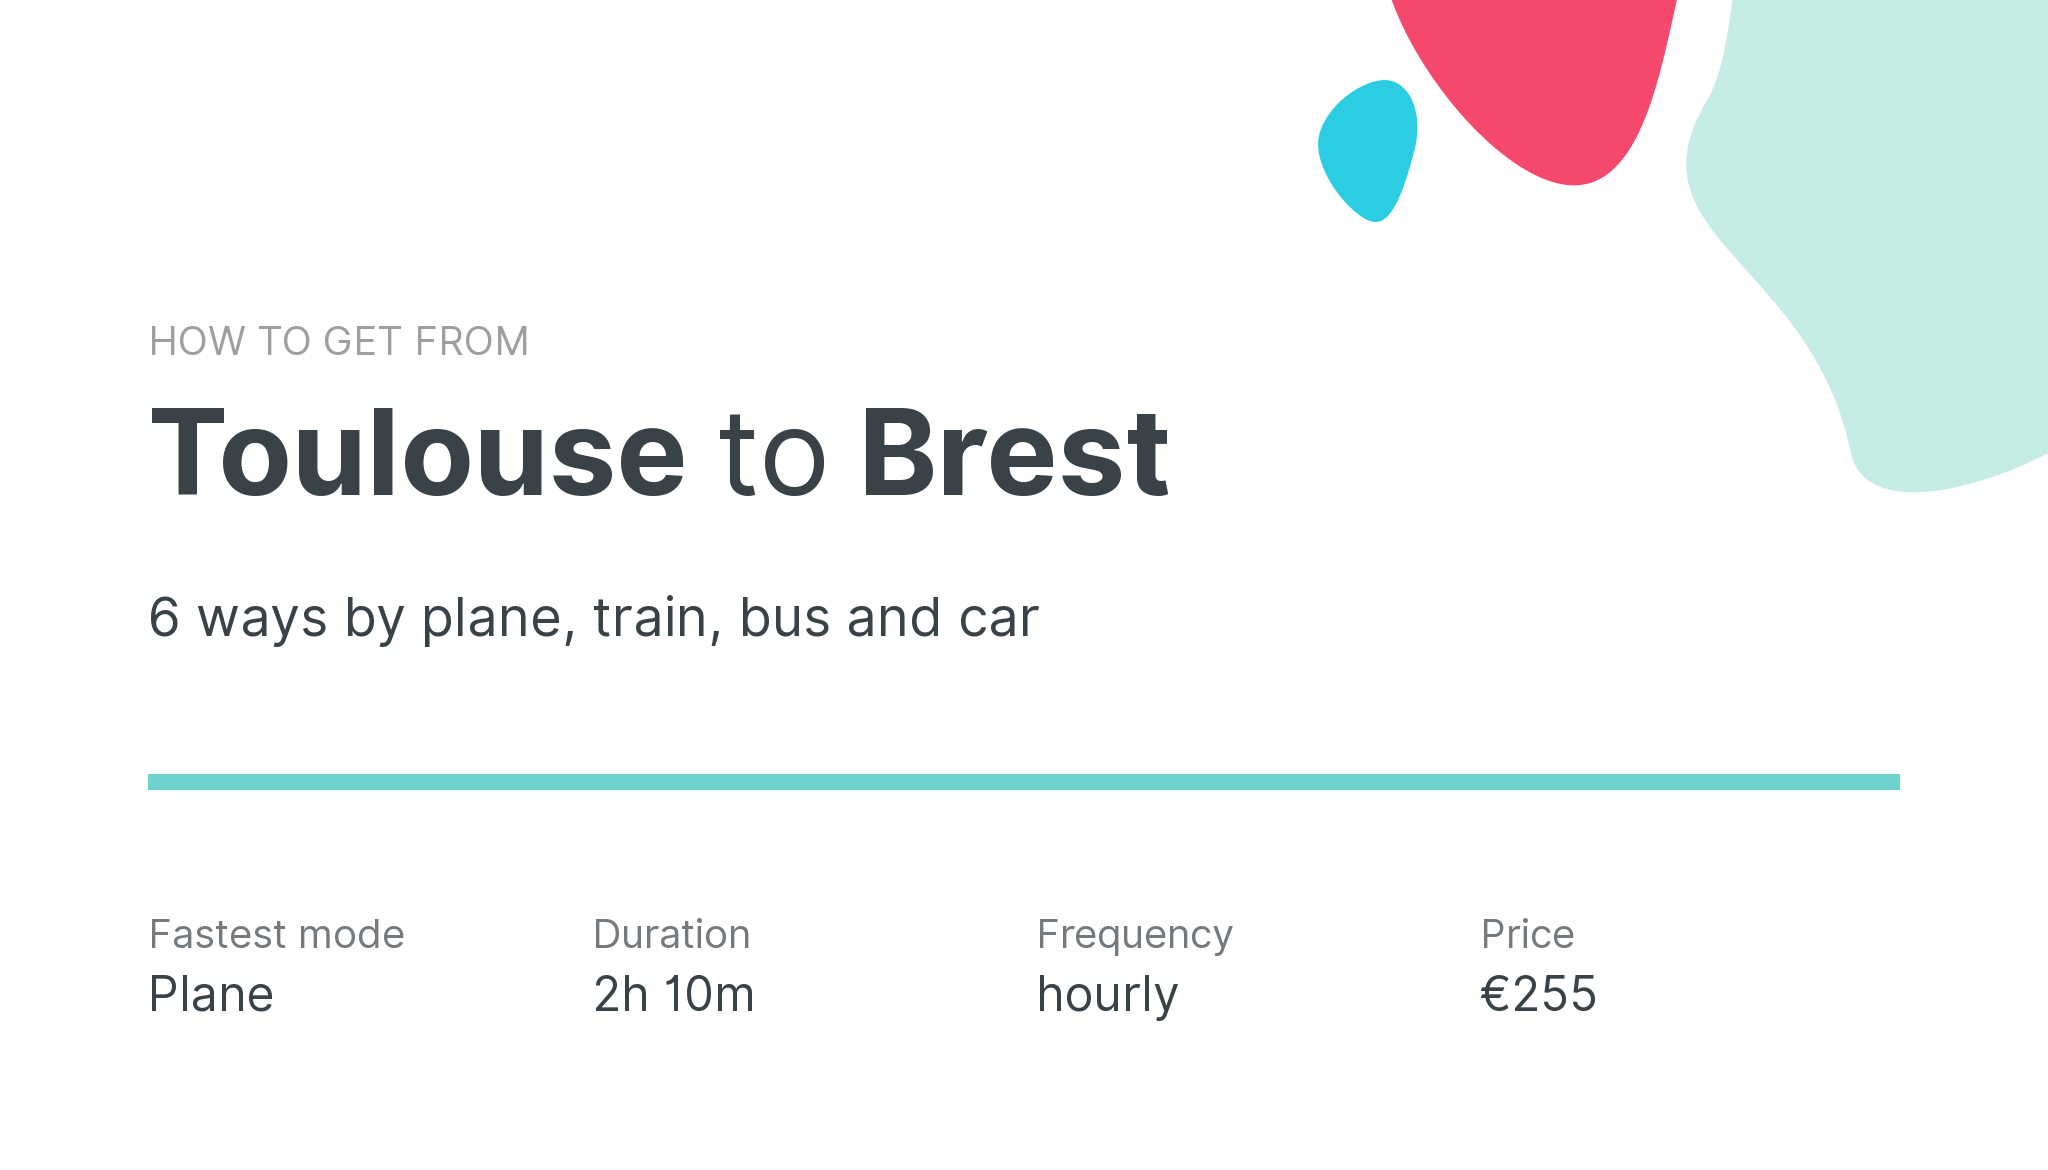 How do I get from Toulouse to Brest